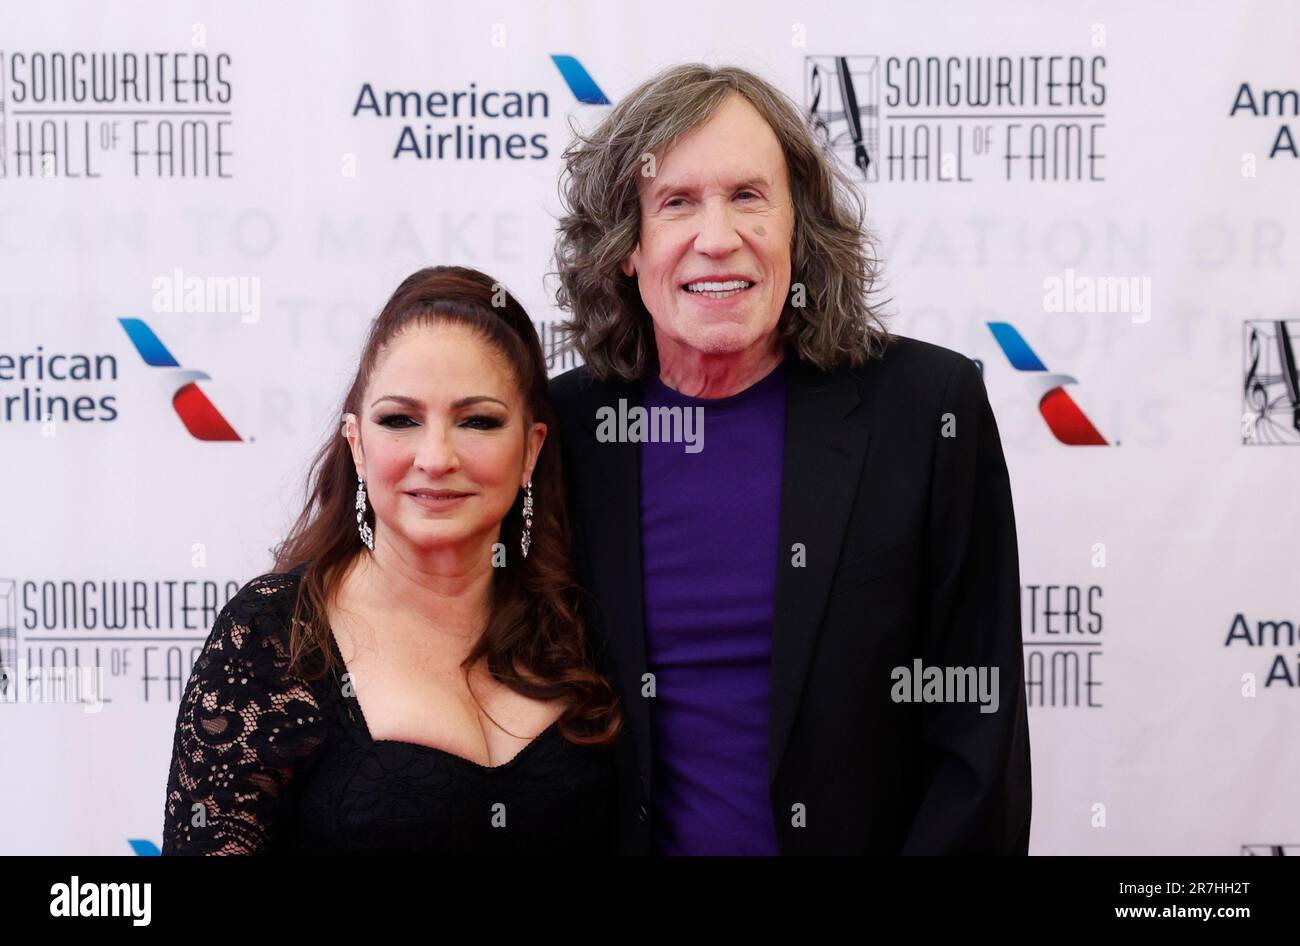 New York, United States. 15th June, 2023. Gloria Estefan and Glen Ballard arrive on the red carpet at the 2023 Songwriters Hall of Fame Induction and Awards Gala at the New York Marriott Marquis on Thursday, June 15, 2023 in New York City. Photo by John Angelillo/UPI Credit: UPI/Alamy Live News Stock Photo